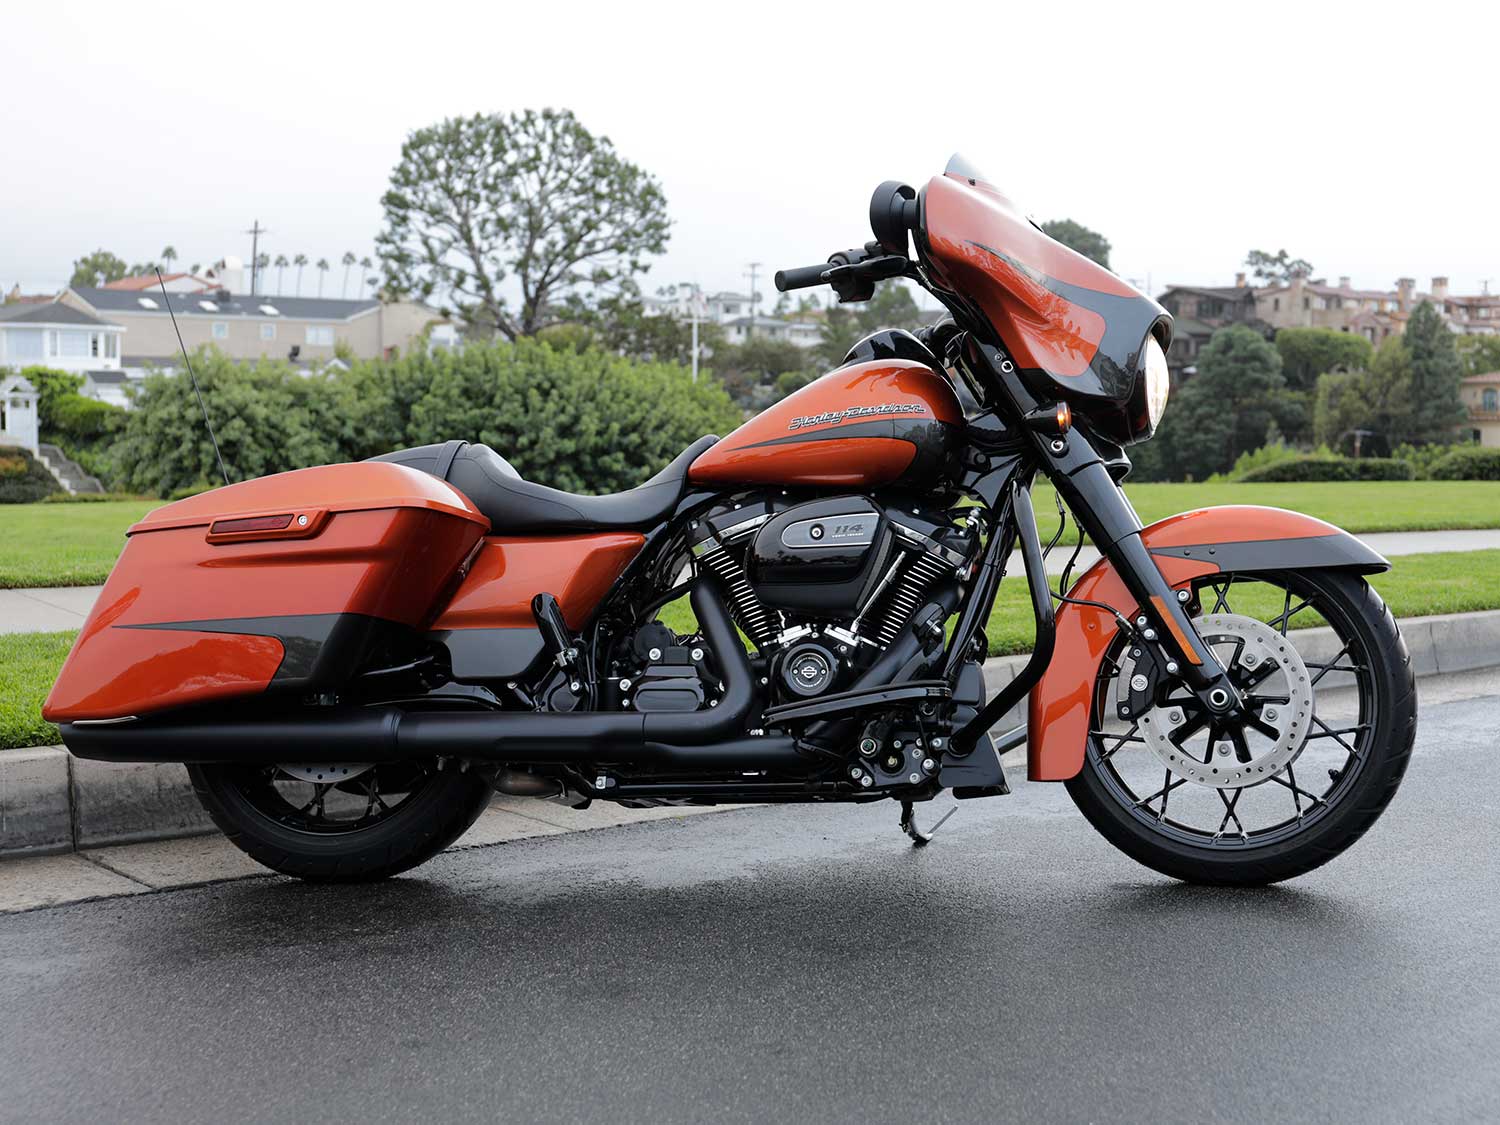 2020 Harley Davidson Street Glide Special Review Mc Commute Motorcyclist